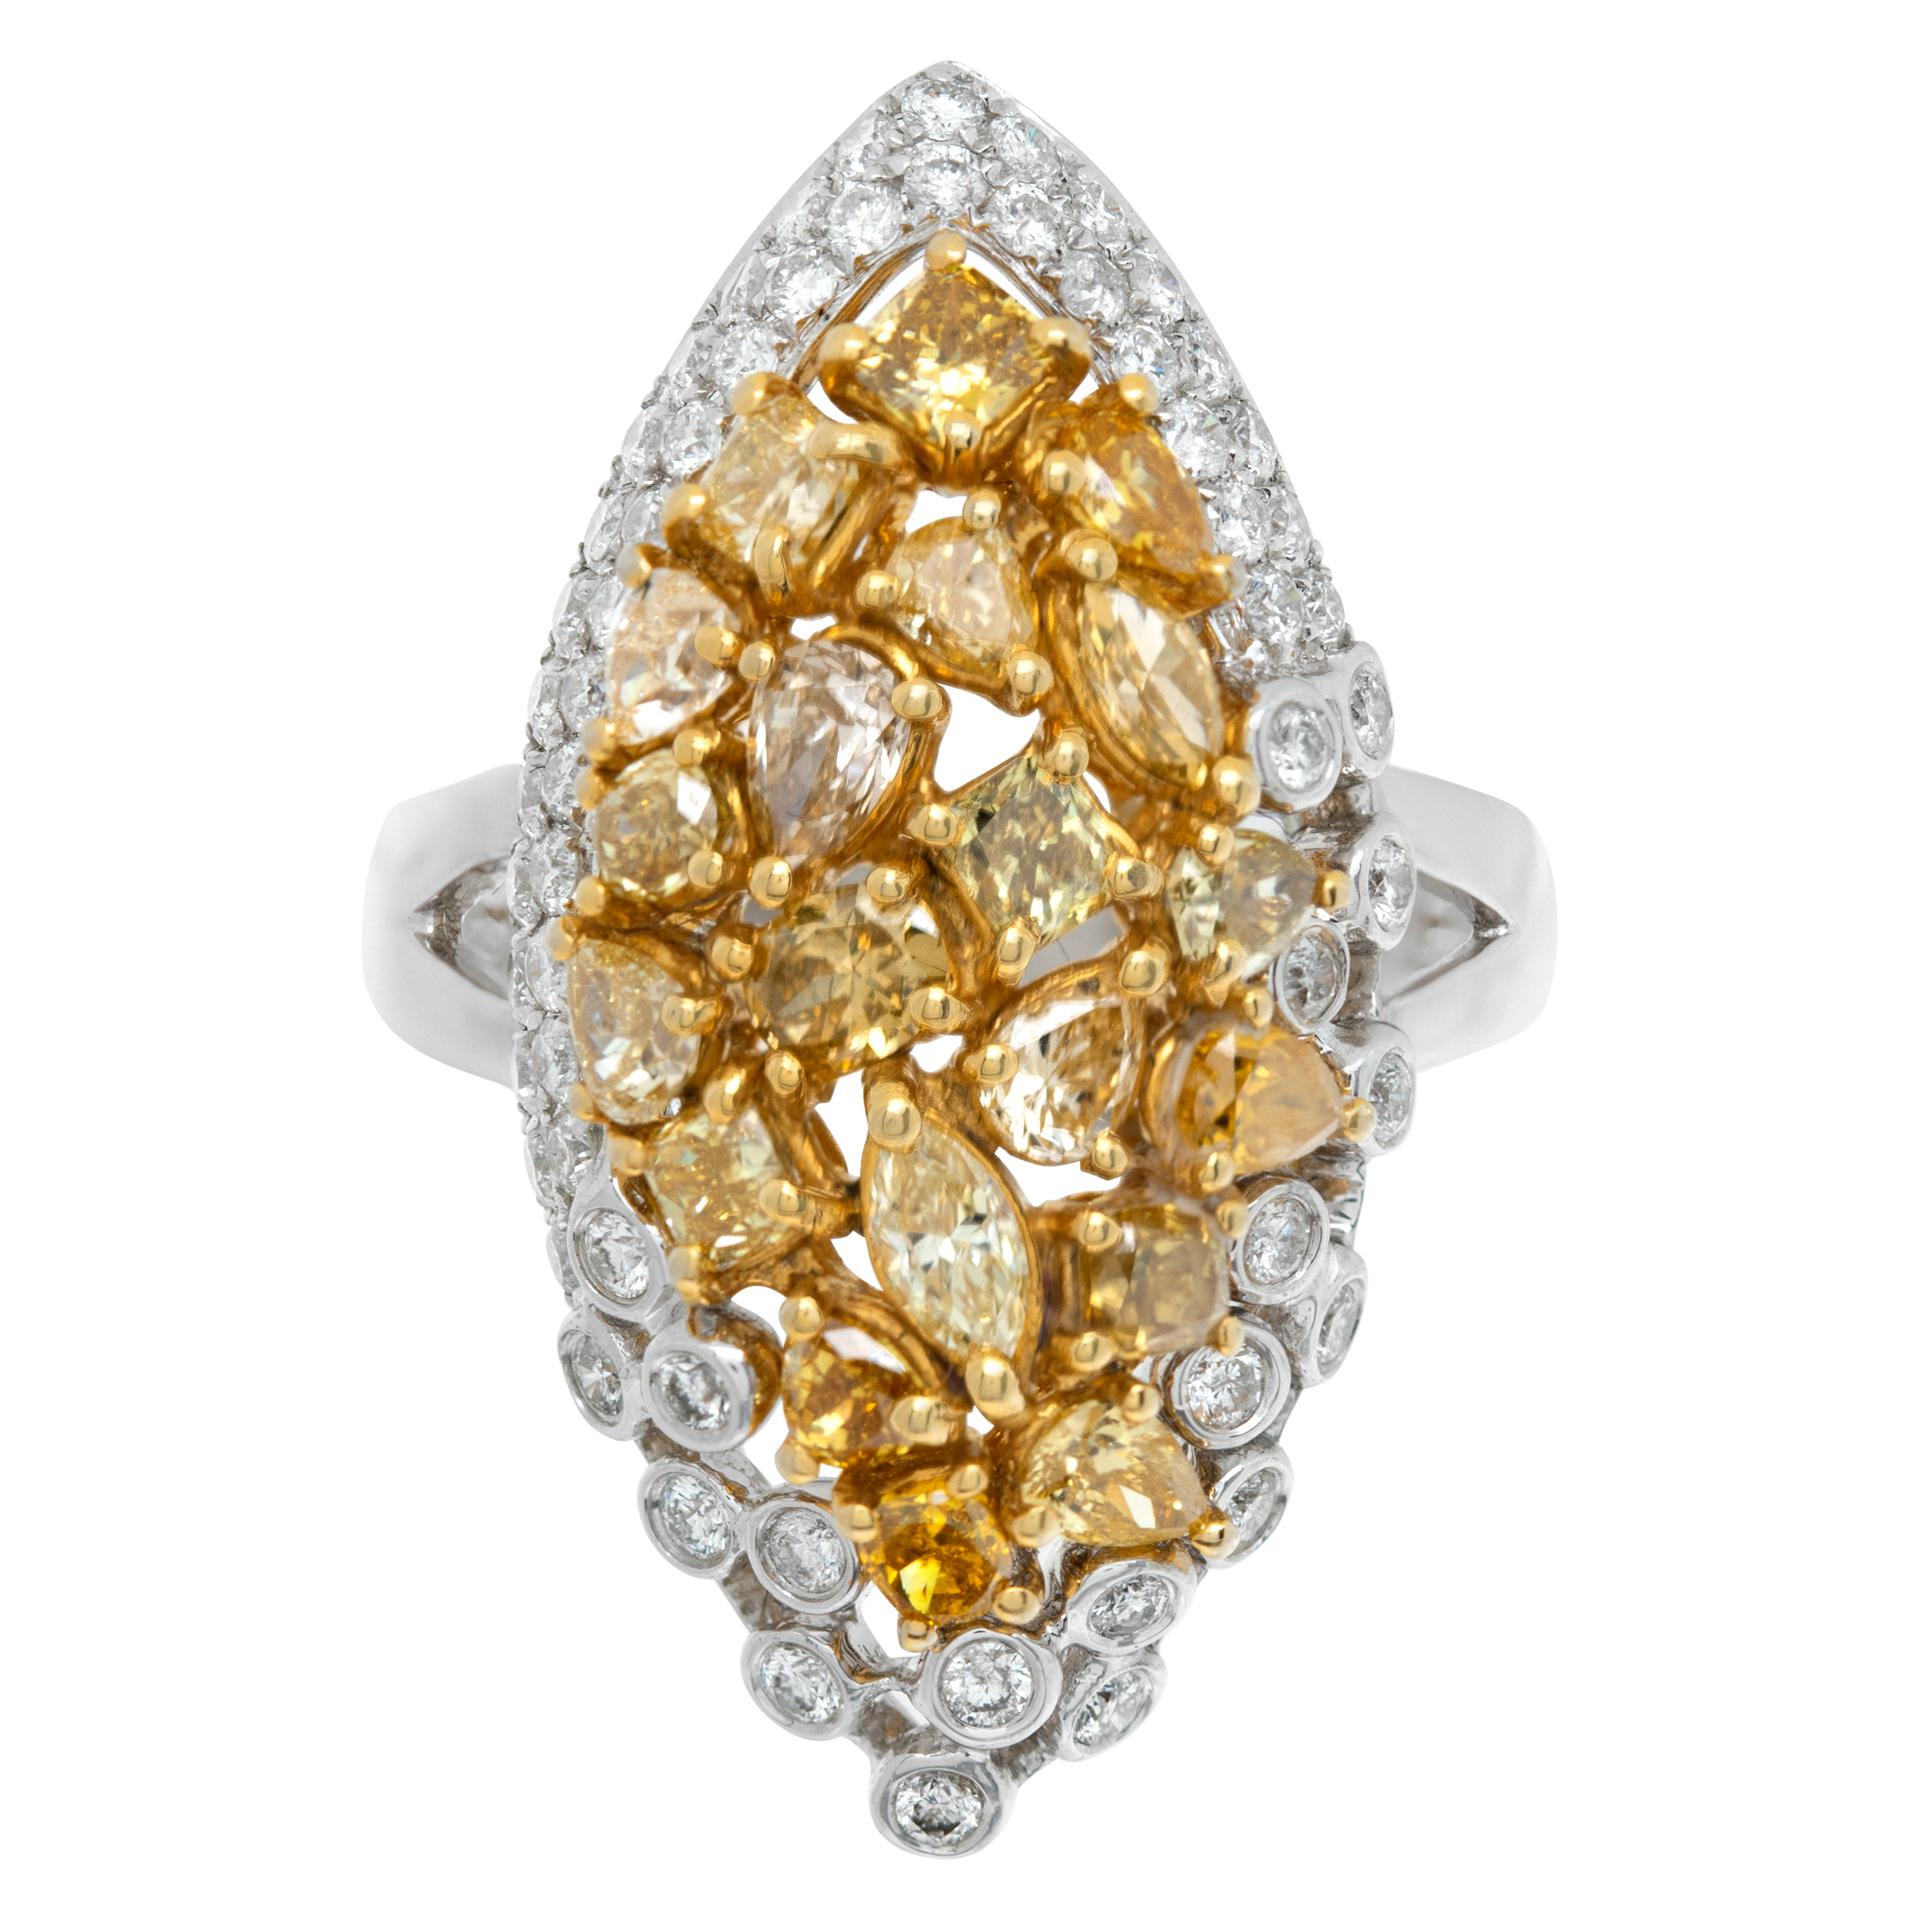 Almond shaped unique 18K White gold ring with 2.26 carats in fancy yellow diamonds and 0.76 carat in round brilliant cut diamonds. Size 6.5, top measures 15mm x 30mm.

This Diamond ring is currently size 6.5 and some items can be sized up or down,